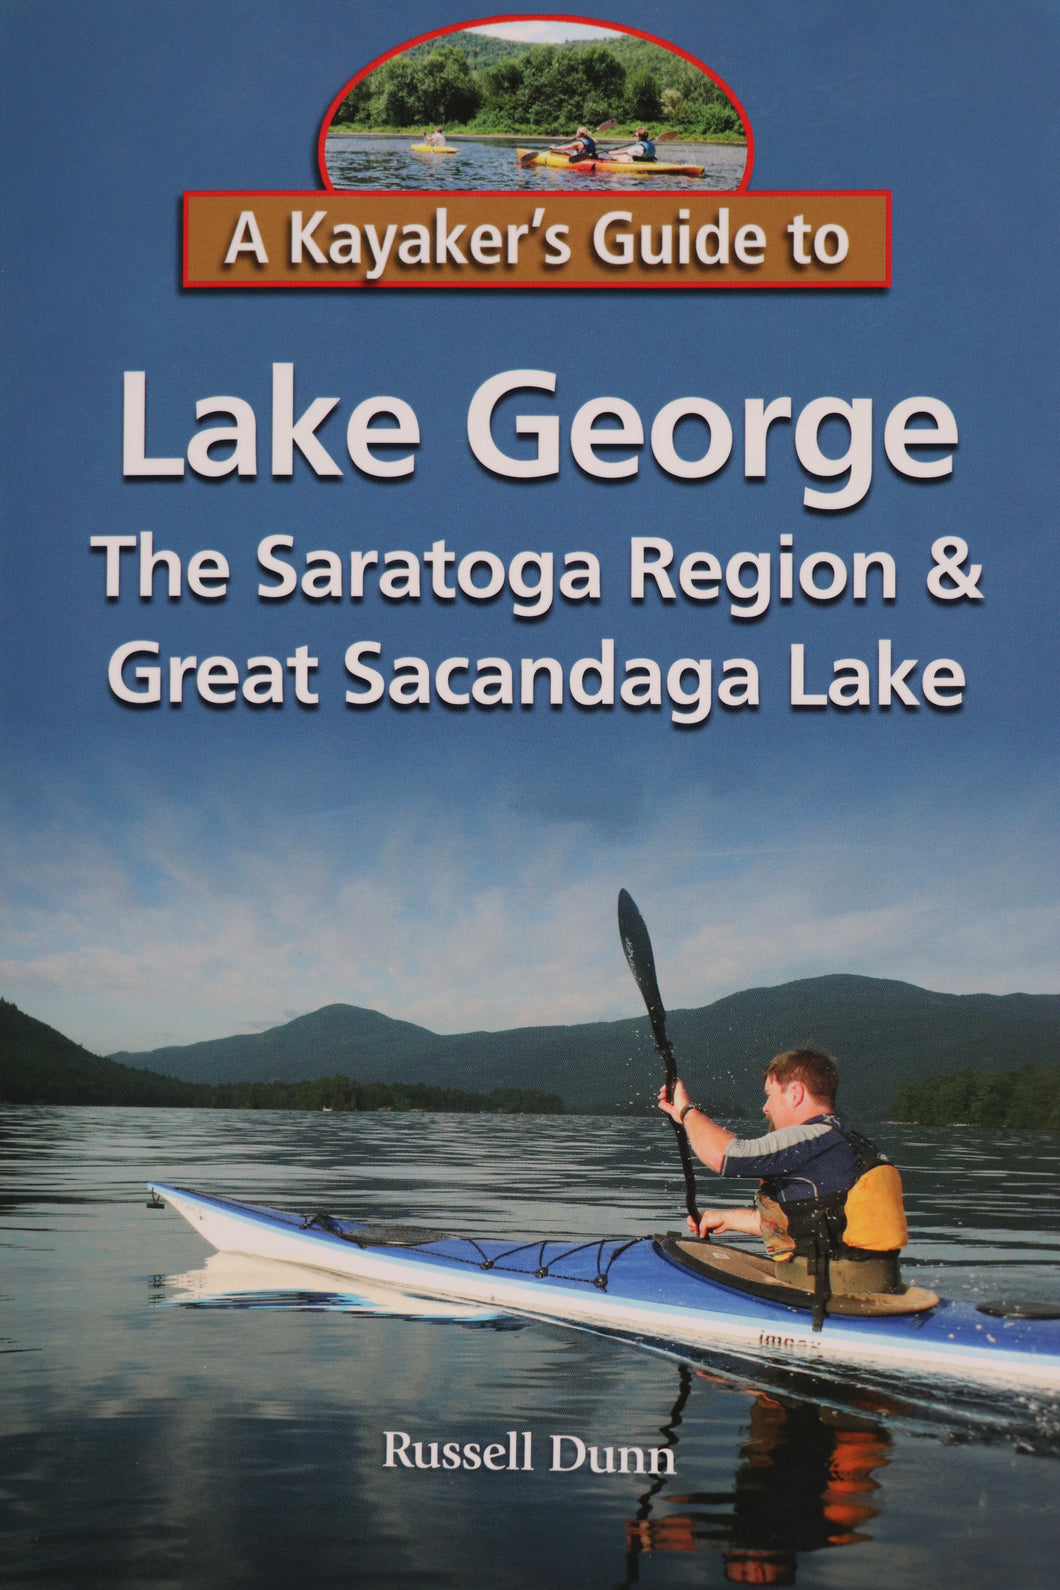 A Kayaker's Guide to Lake George